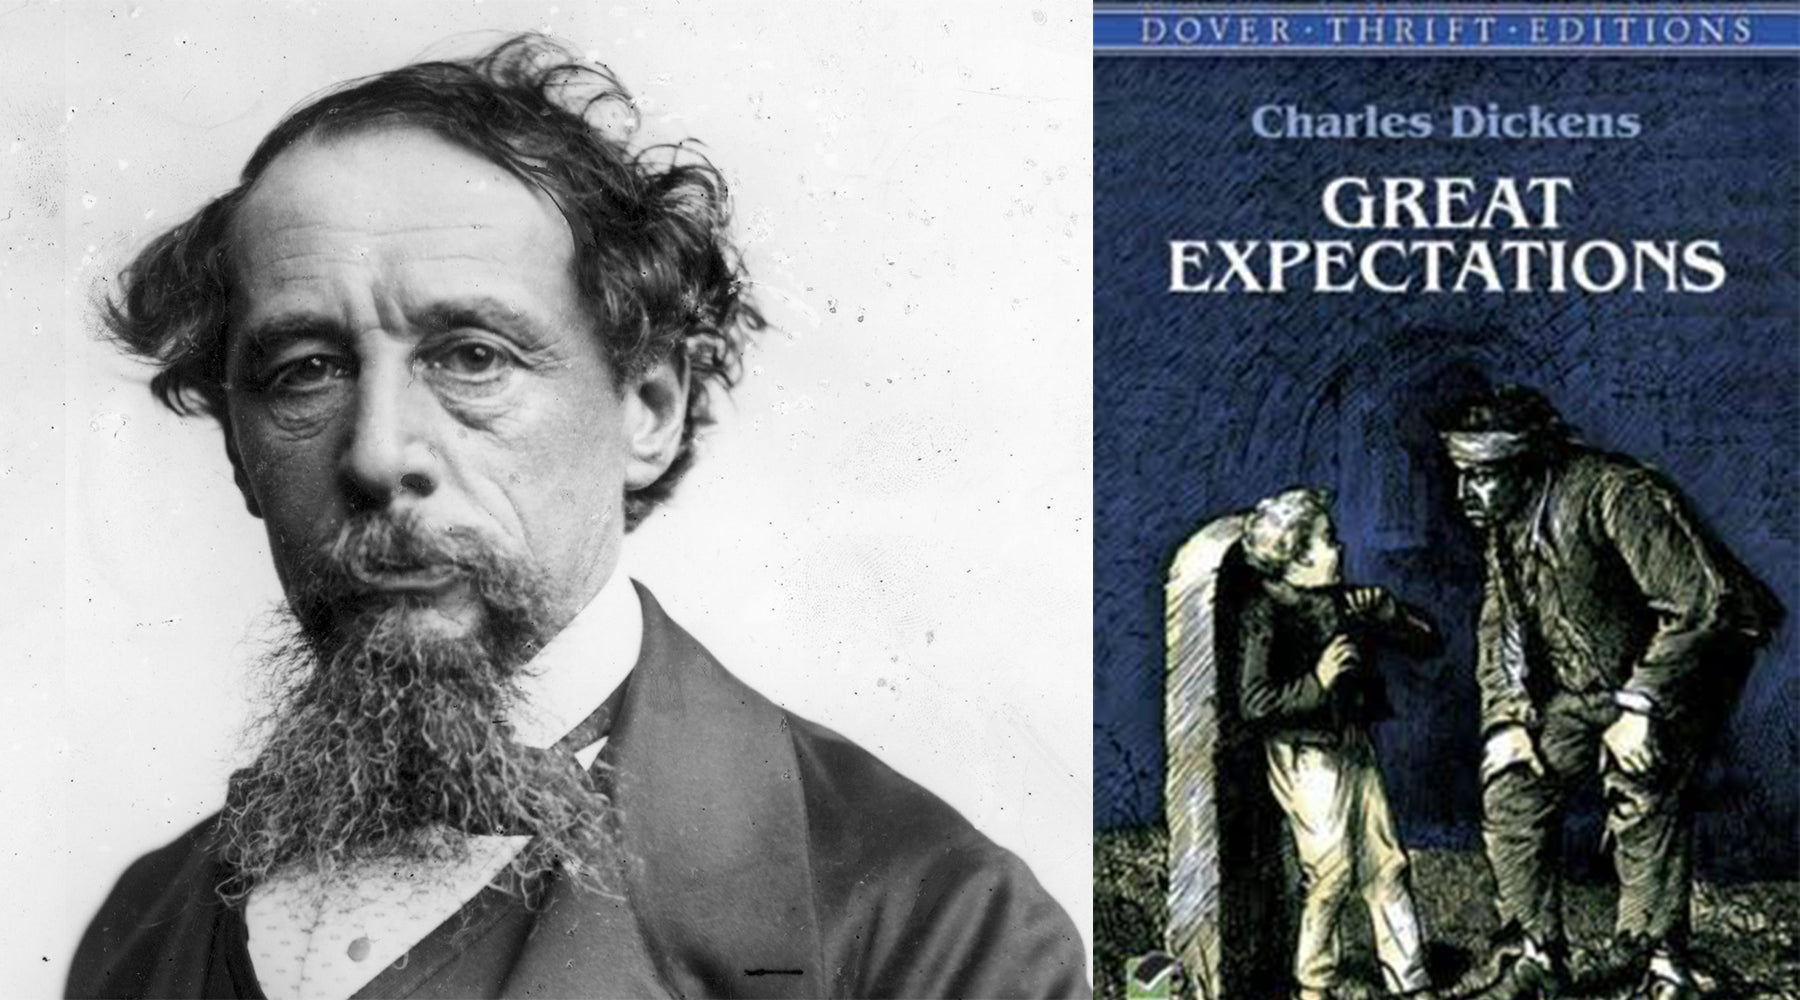 THE UNCANNY WORDSMITH: Charles Dickens